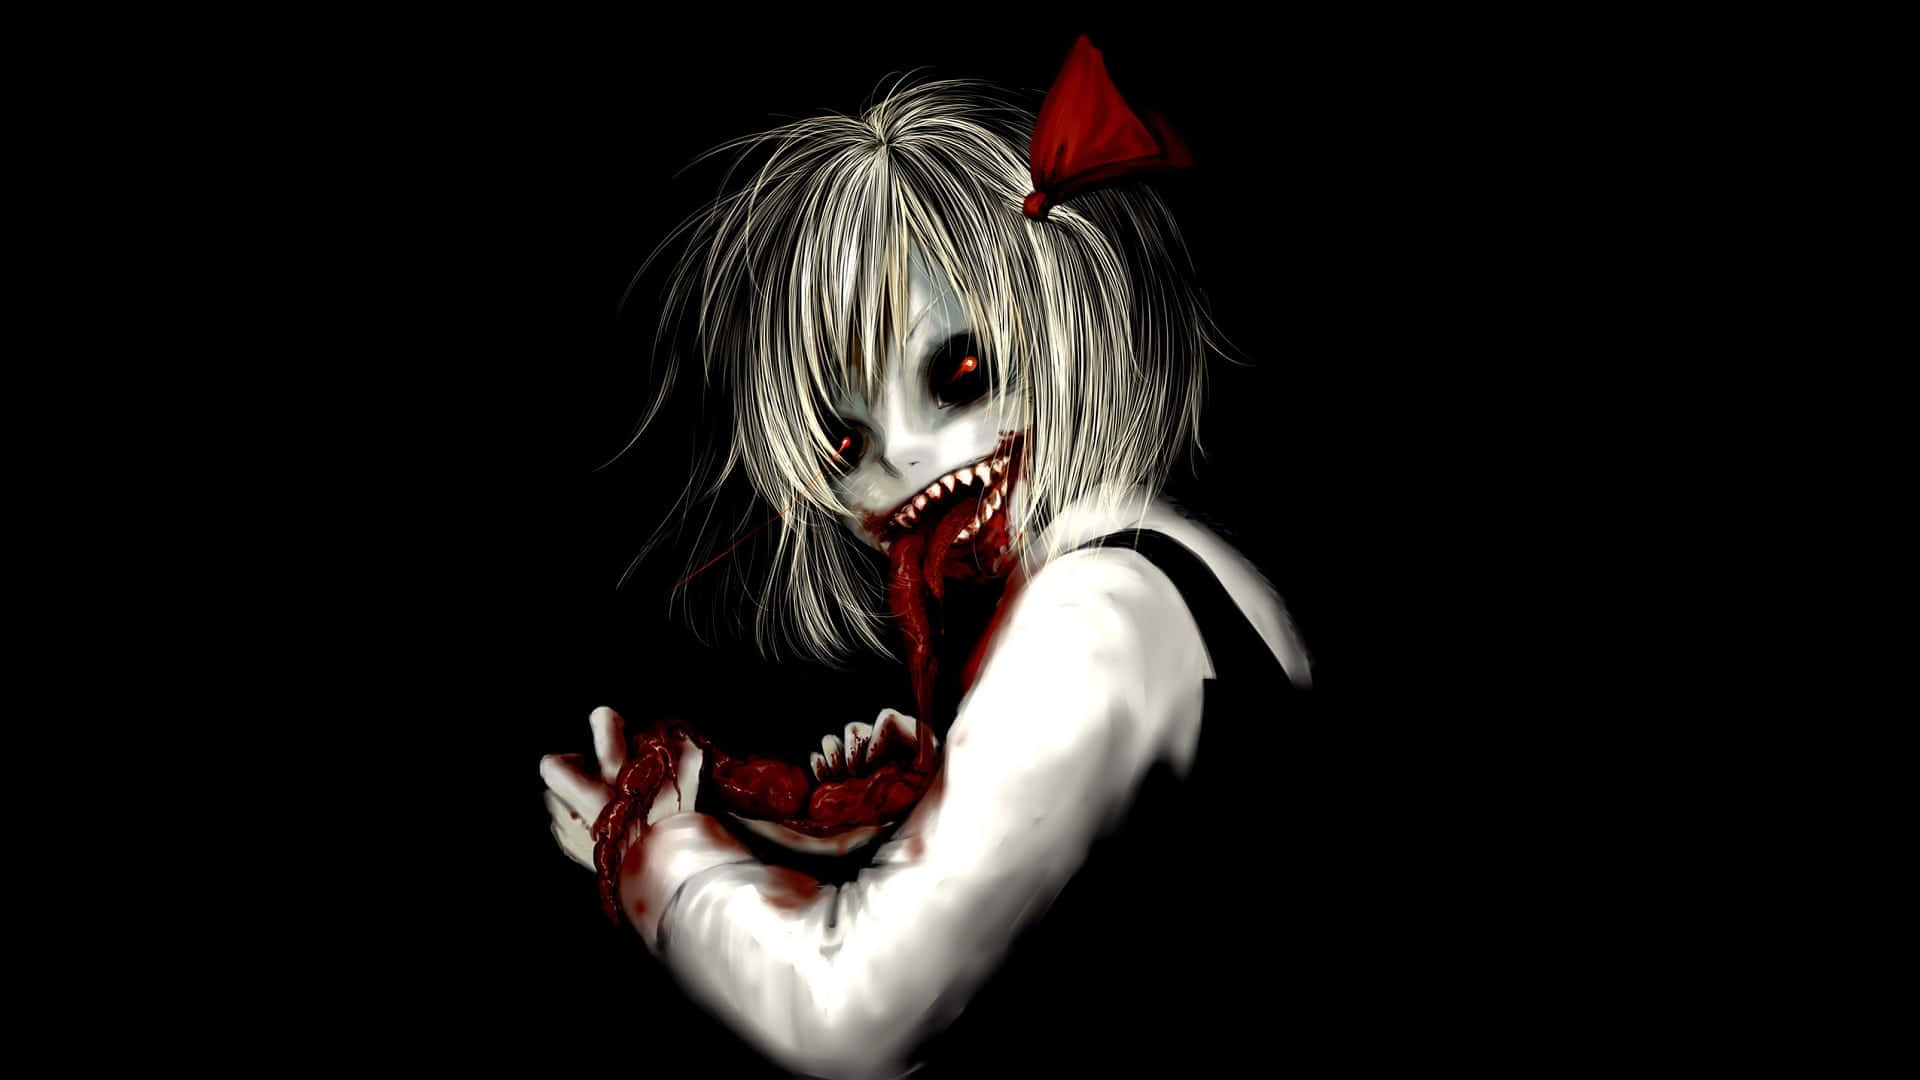 Explore the world of terror with this gripping horror anime wallpaper! Wallpaper